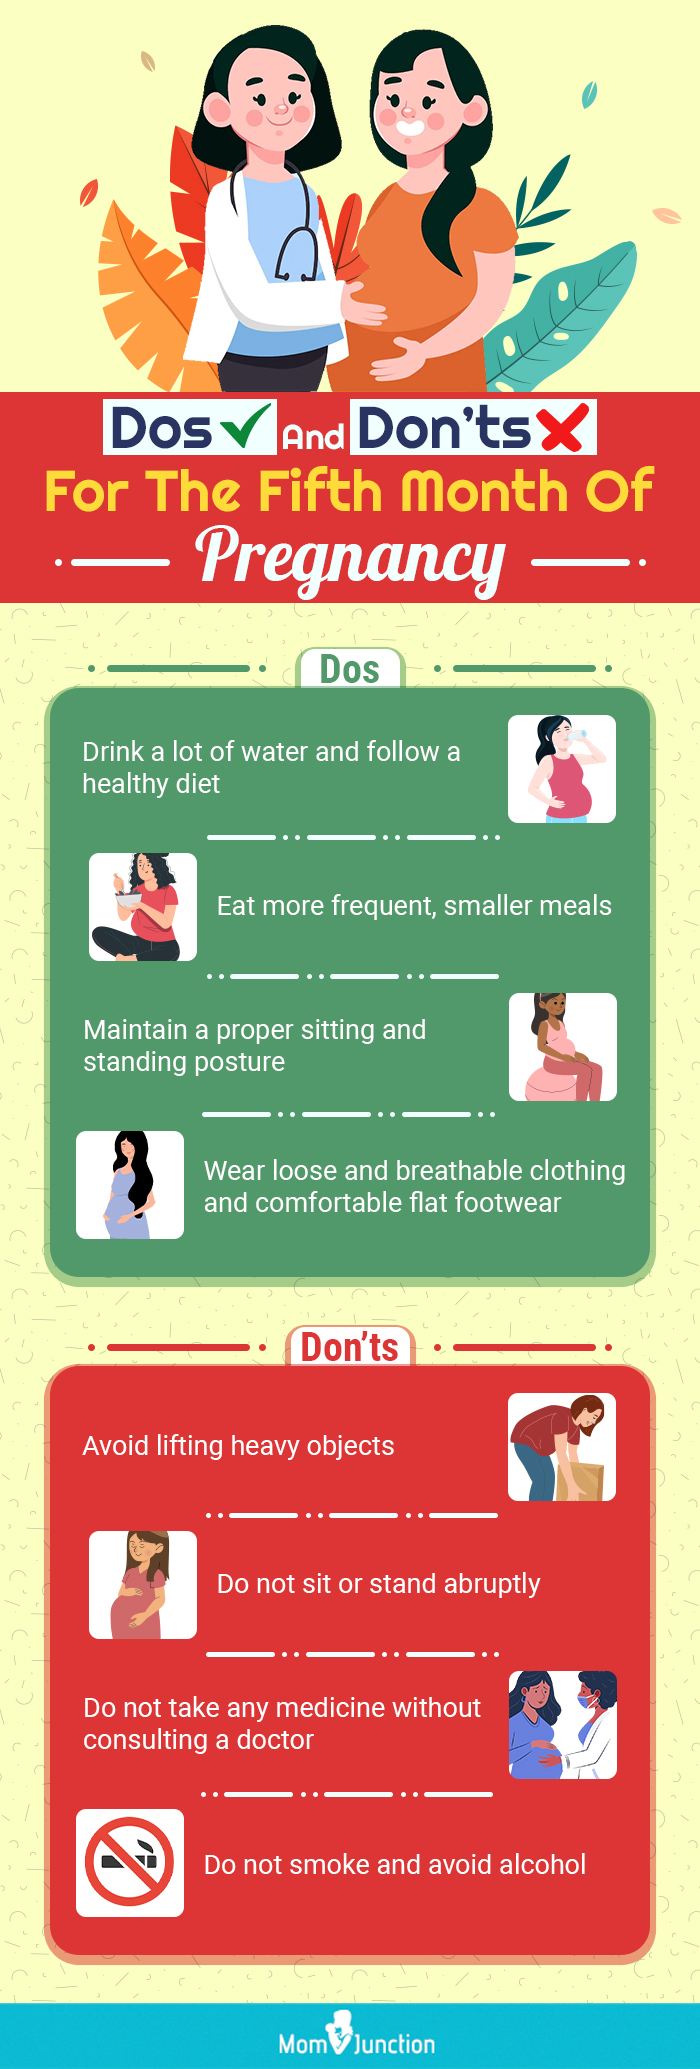 dos and donts for the fifth month of pregnancy (infographic)